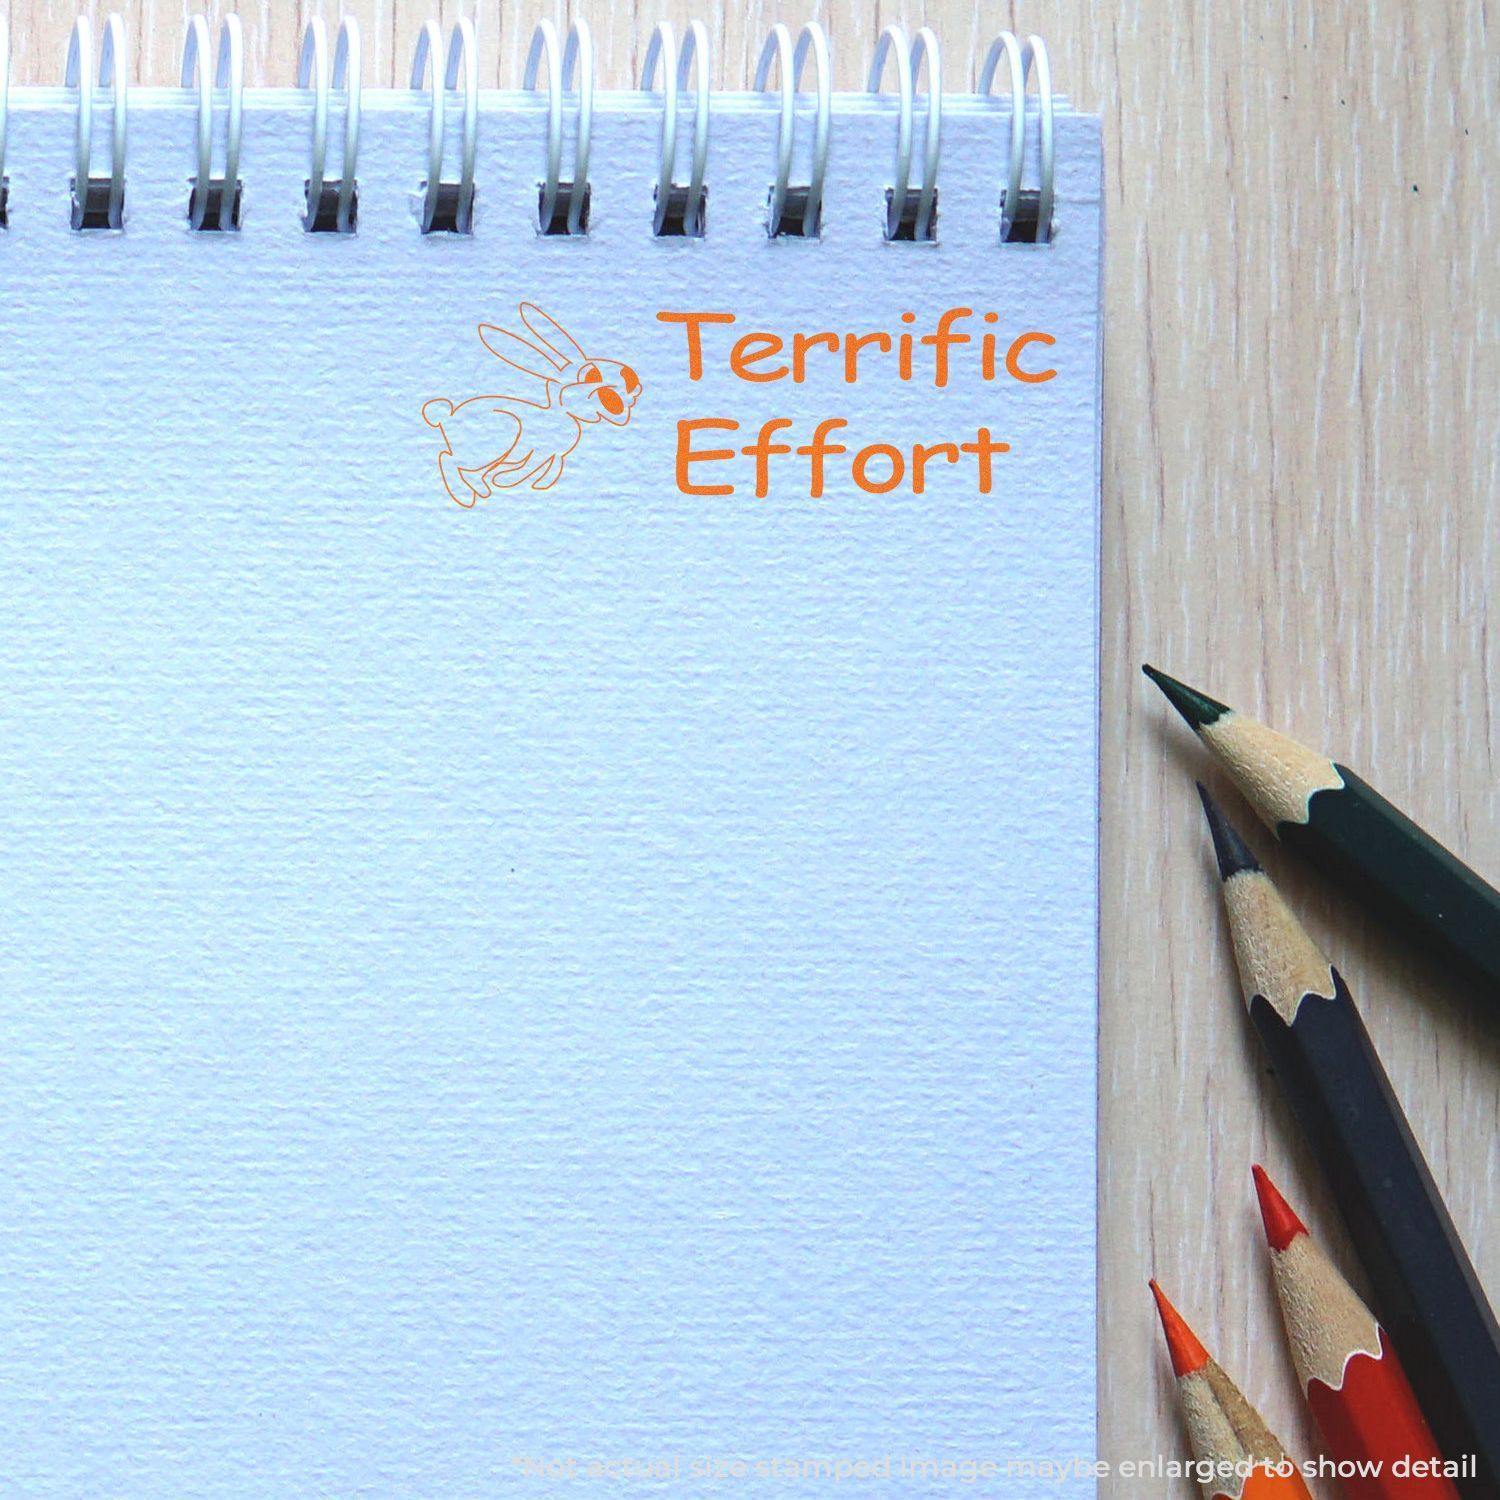 A self-inking stamp with a stamped image showing how the text "Terrific Effort" in an impactful bold font with an image of a hopping rabbit on the left side is displayed after stamping.